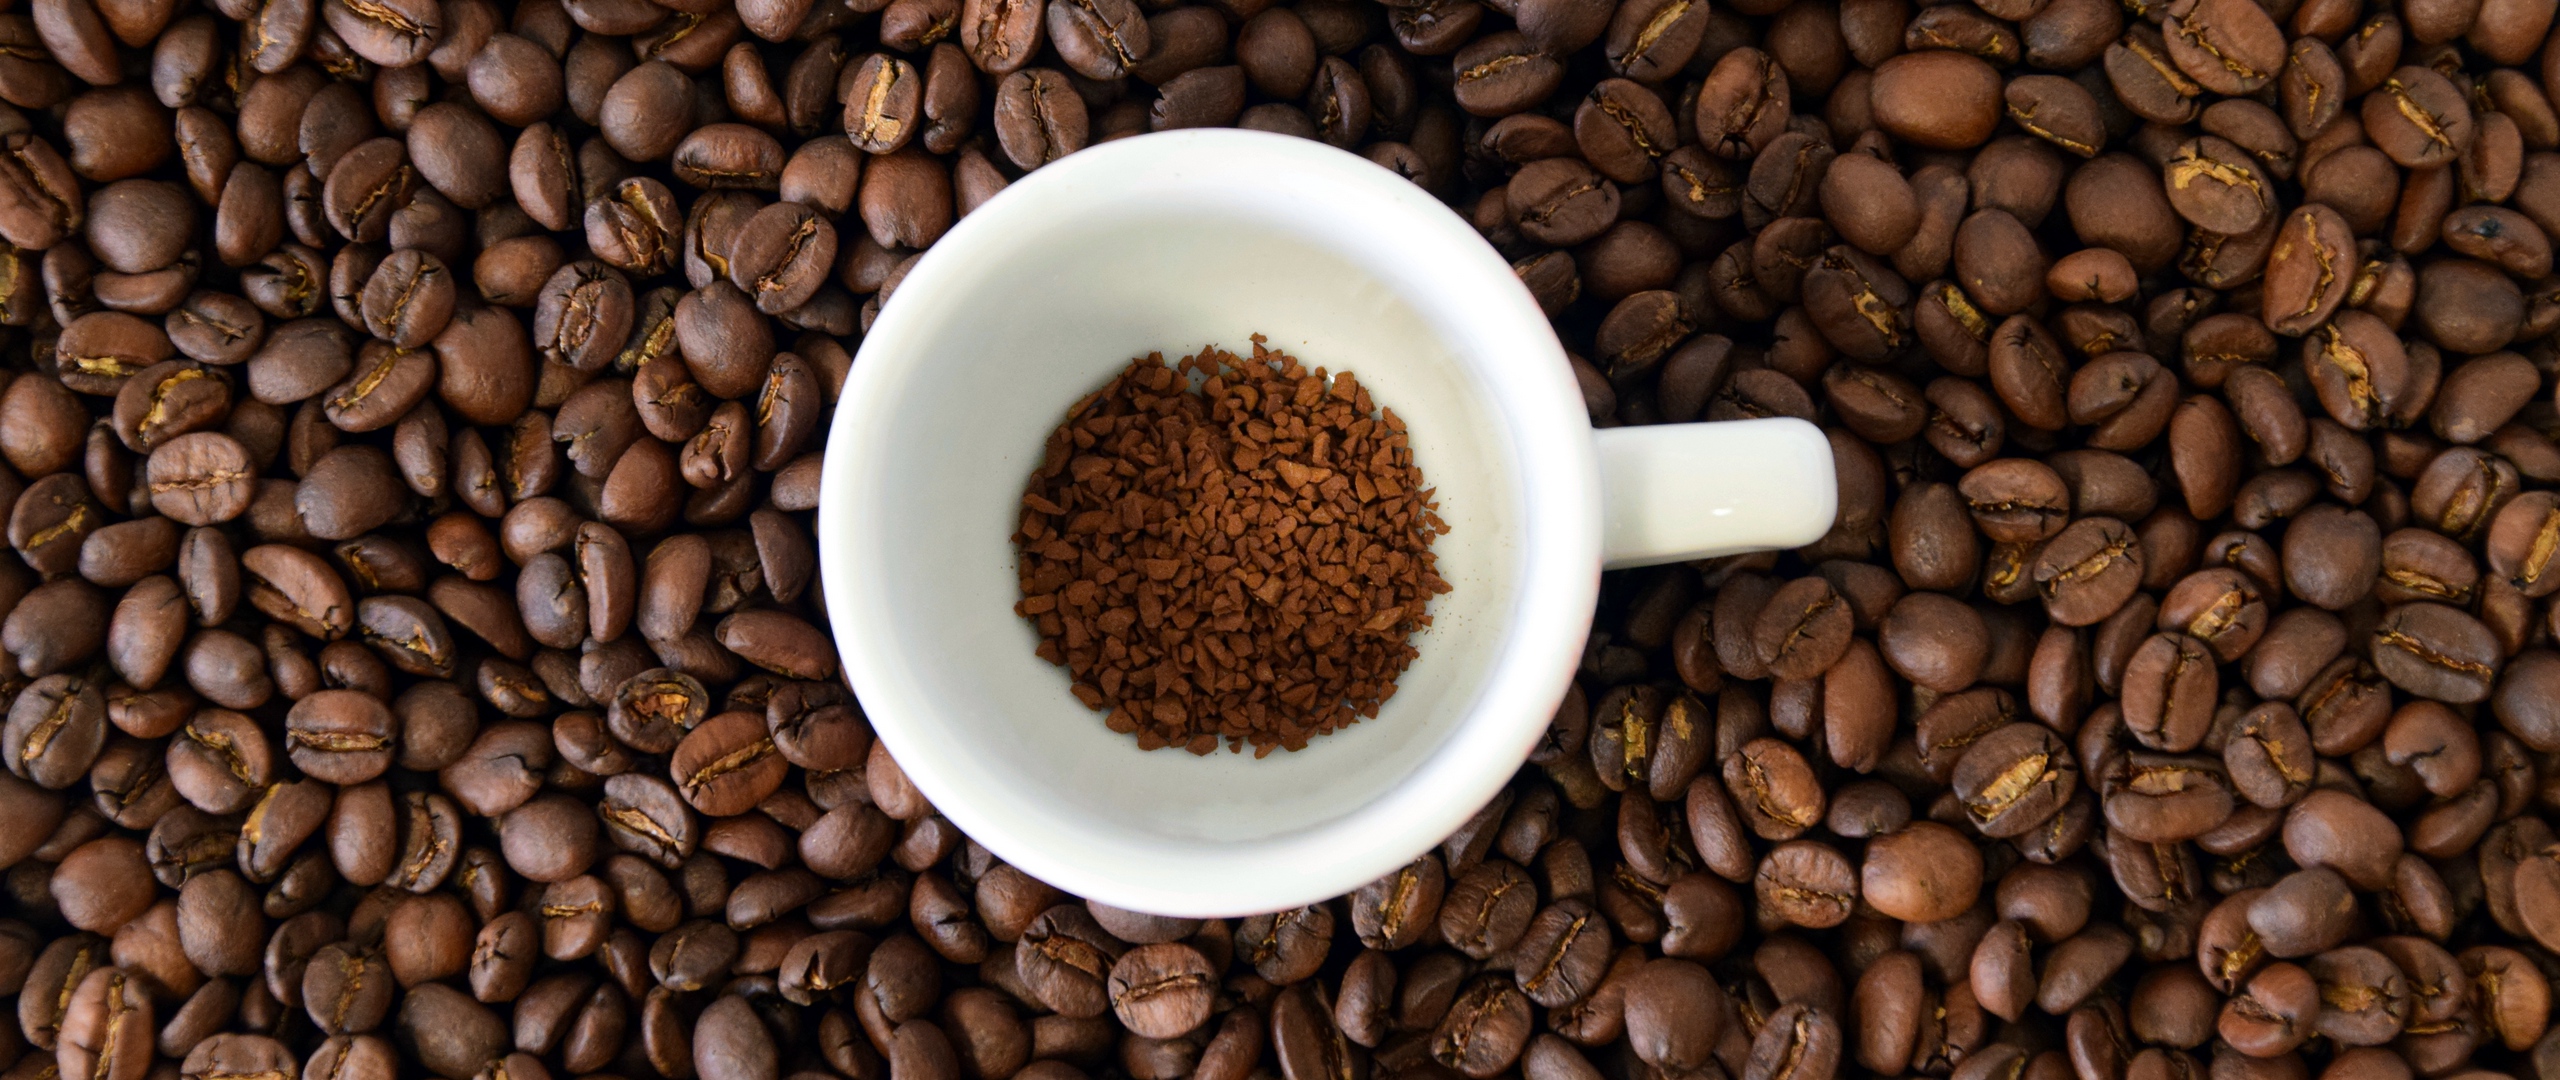 Download wallpaper 2560x1080 coffee beans, coffee, cup dual wide